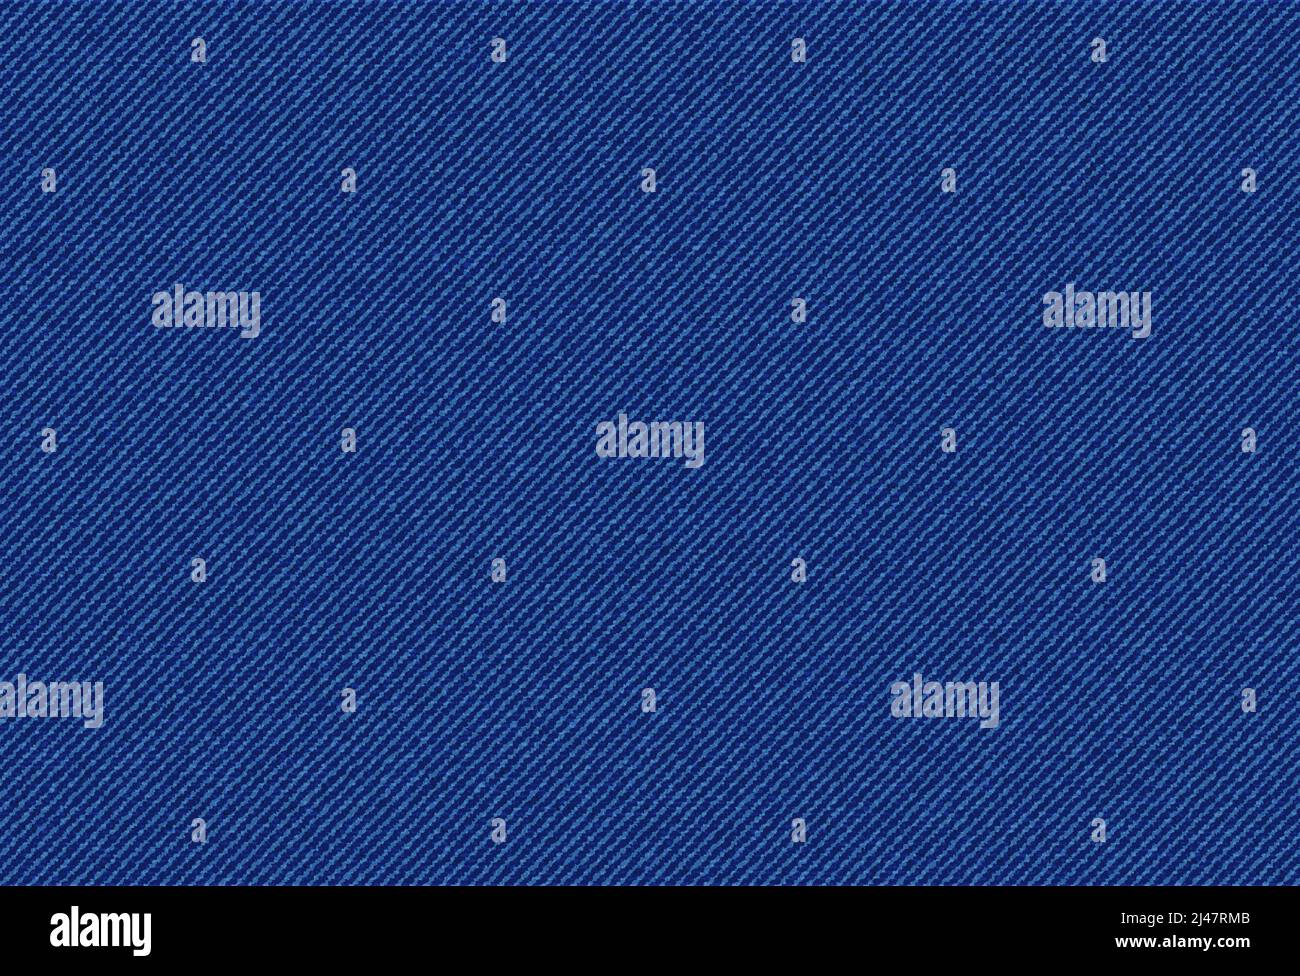 Jeans denim texture pattern background, navy blue apparel fabric pattern, realistic vector. Blue jeans cloth or denim canvas material in macro closeup, cotton textile of denim jeans or upholstery Stock Vector